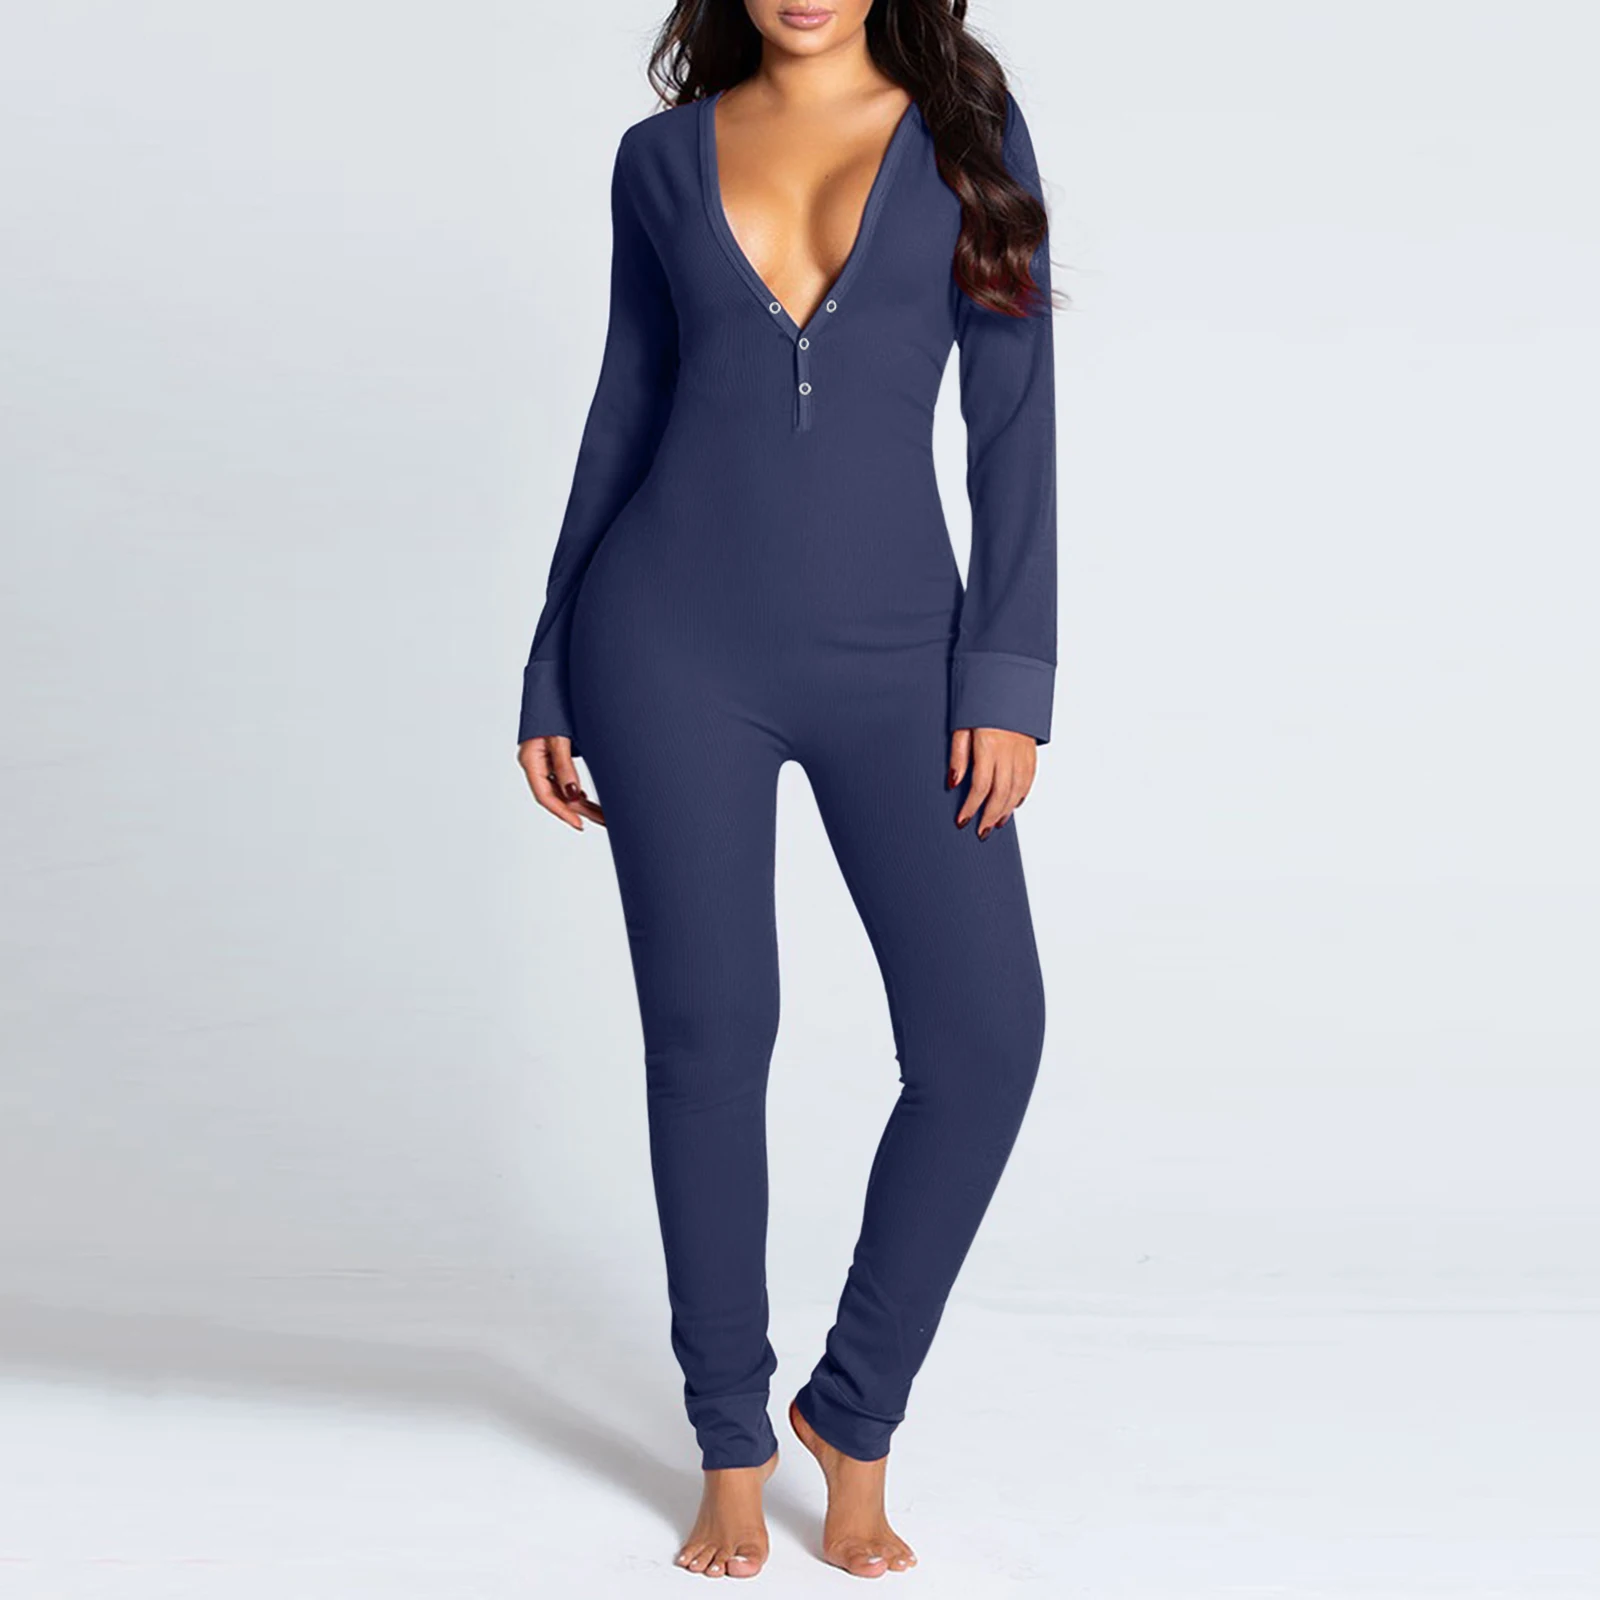 Women Sexy Jumpsuit Long-Sleeved Homewear Bodycon Open Crotch One-Piece Pajamas V-Neck Home Clothes Sleepwear 5